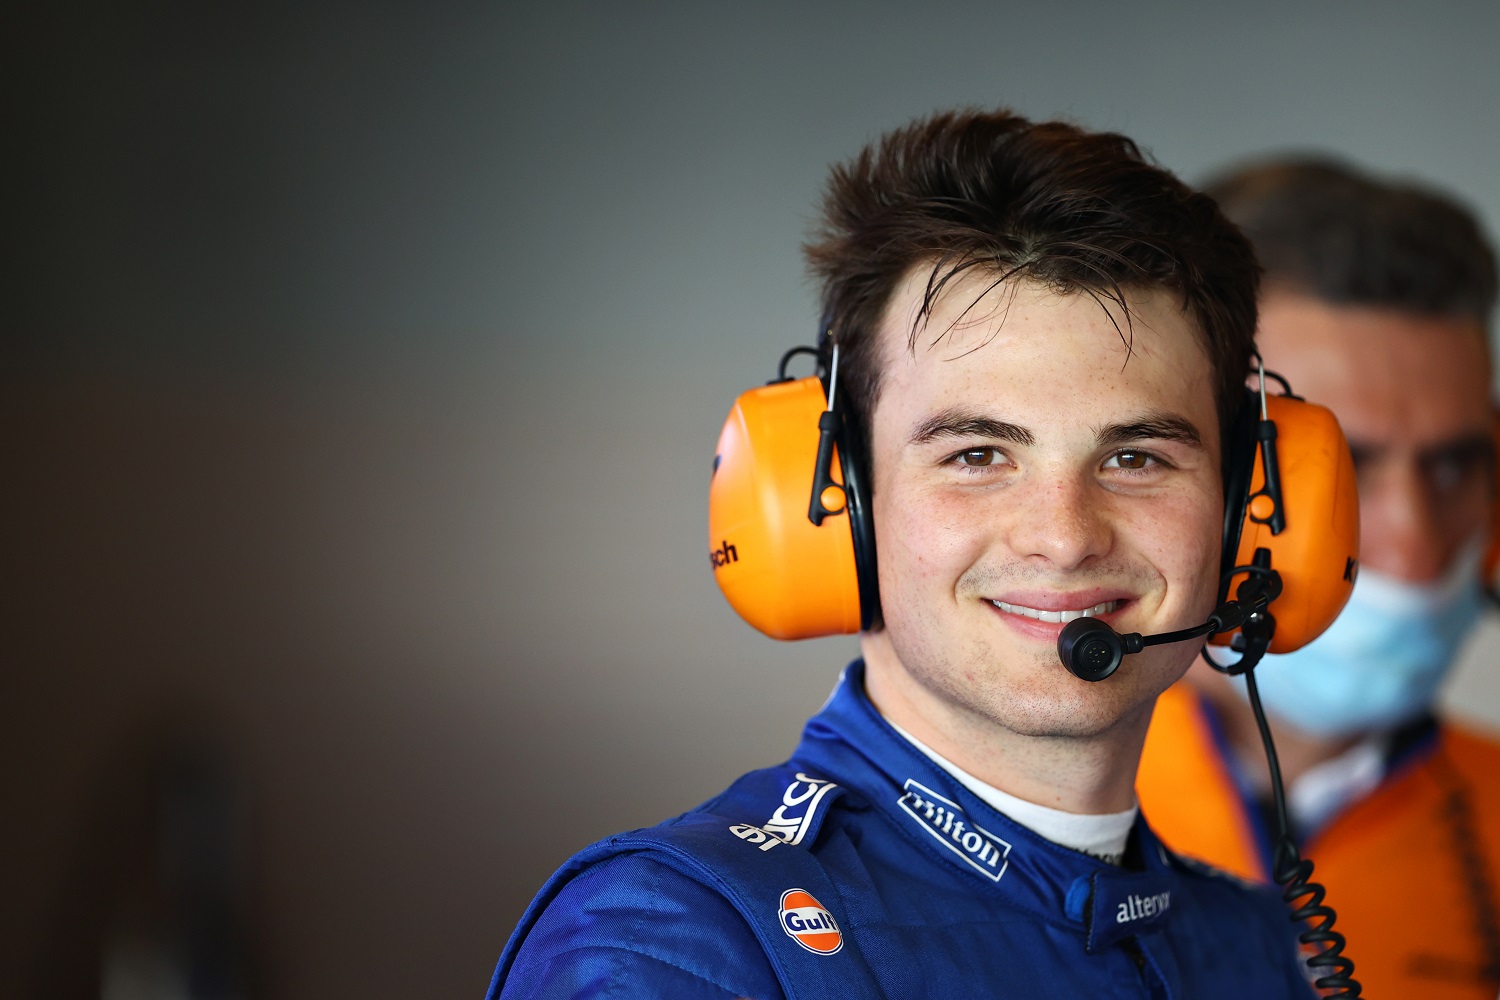 What Is the Super License That Formula 1 Requires Aspiring Drivers Like Pato O’Ward and Colton Herta to Earn?